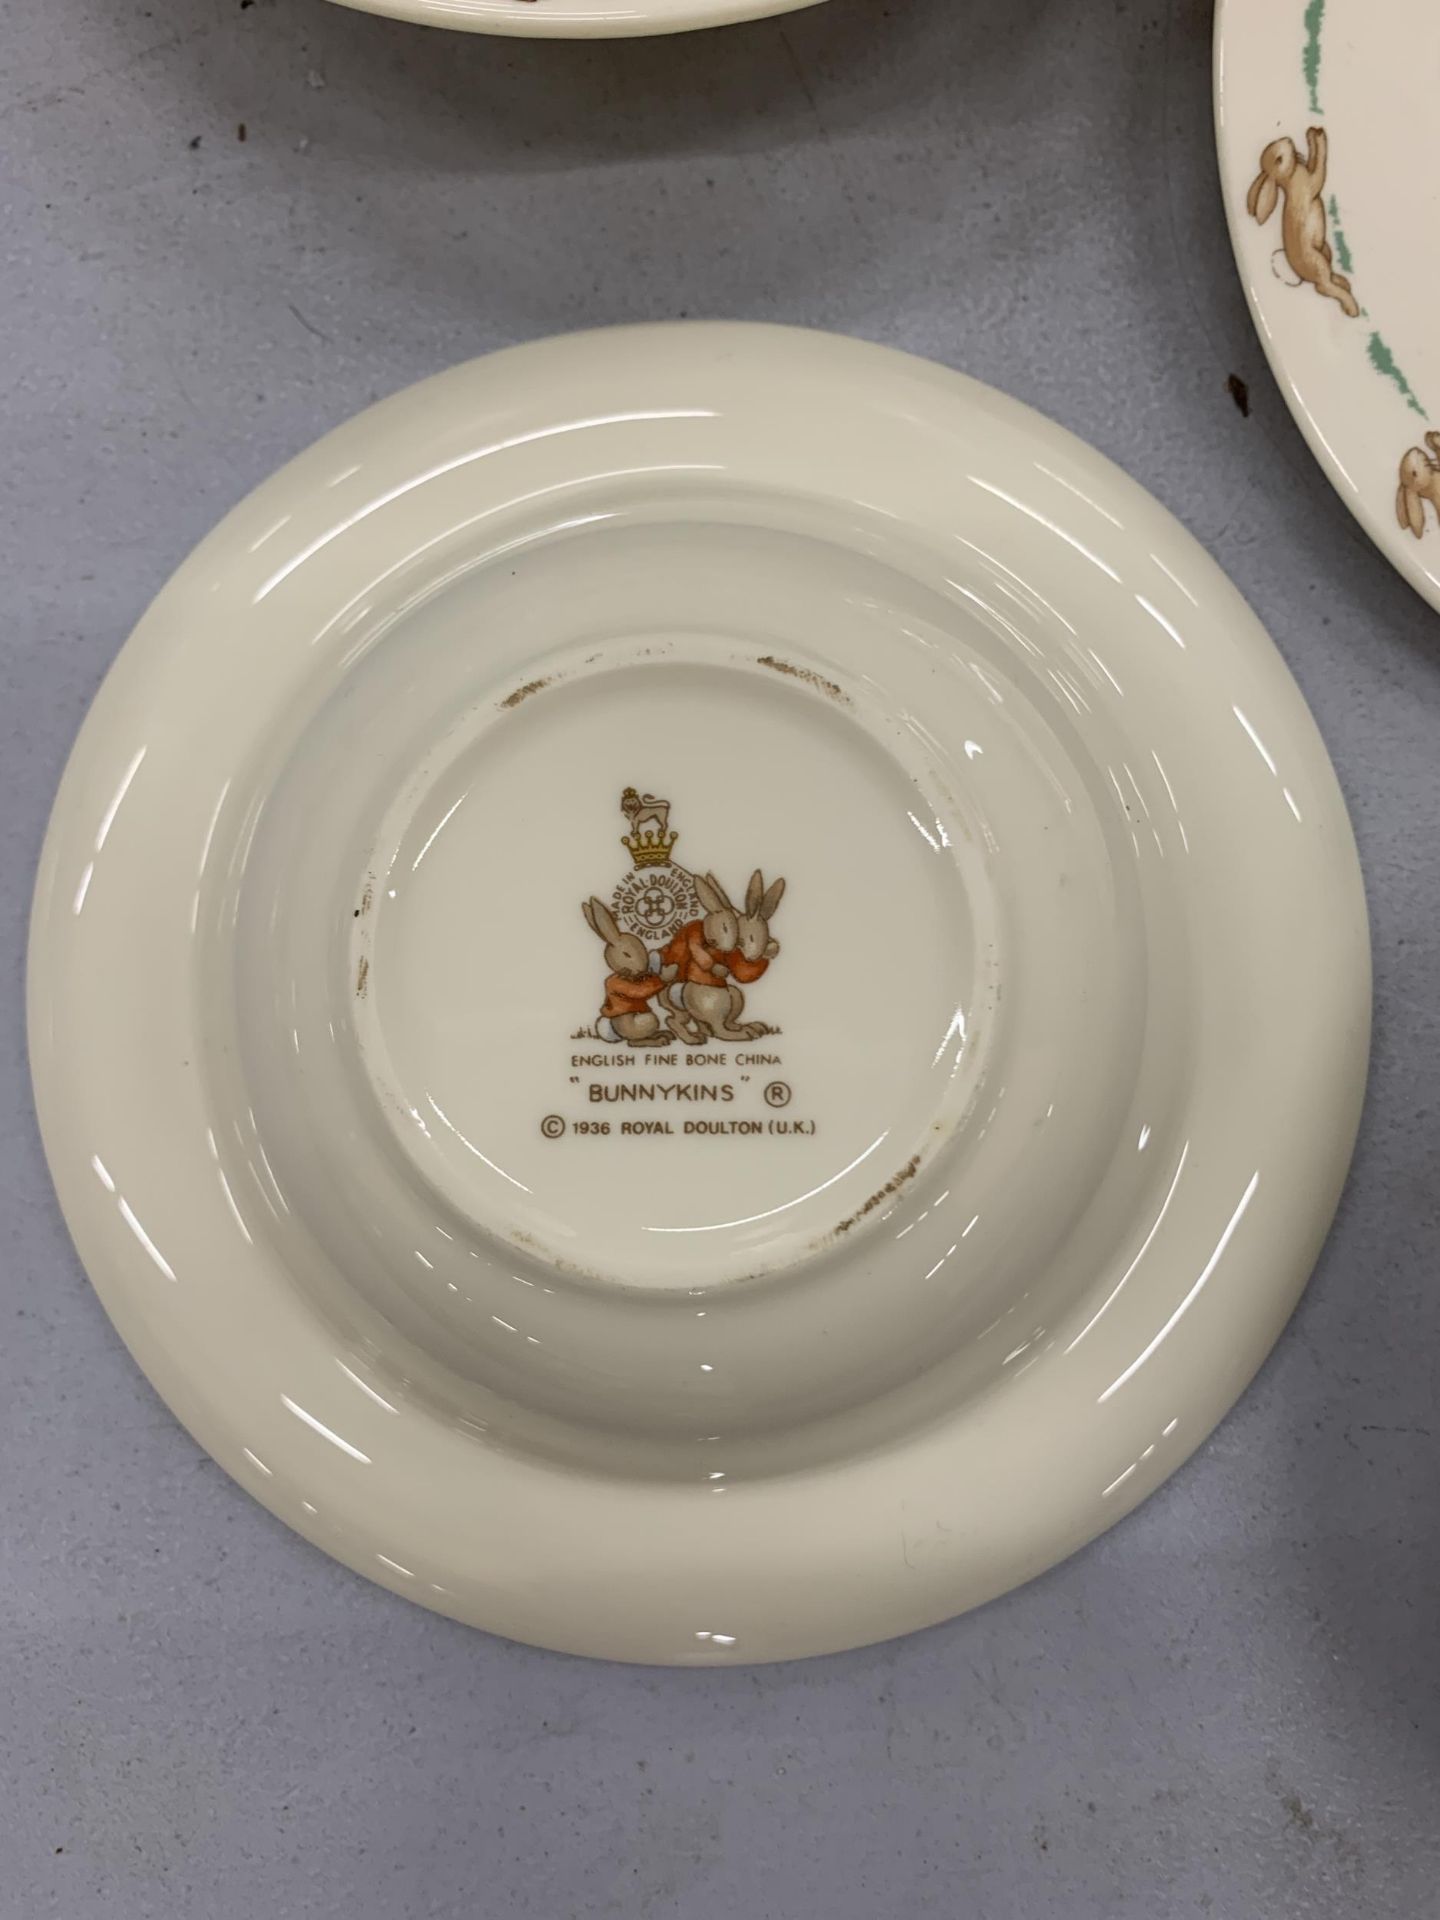 A COLLECTION OF ROYAL DOULTON BUNNYKINS DISHES AND PLATES - Image 3 of 3